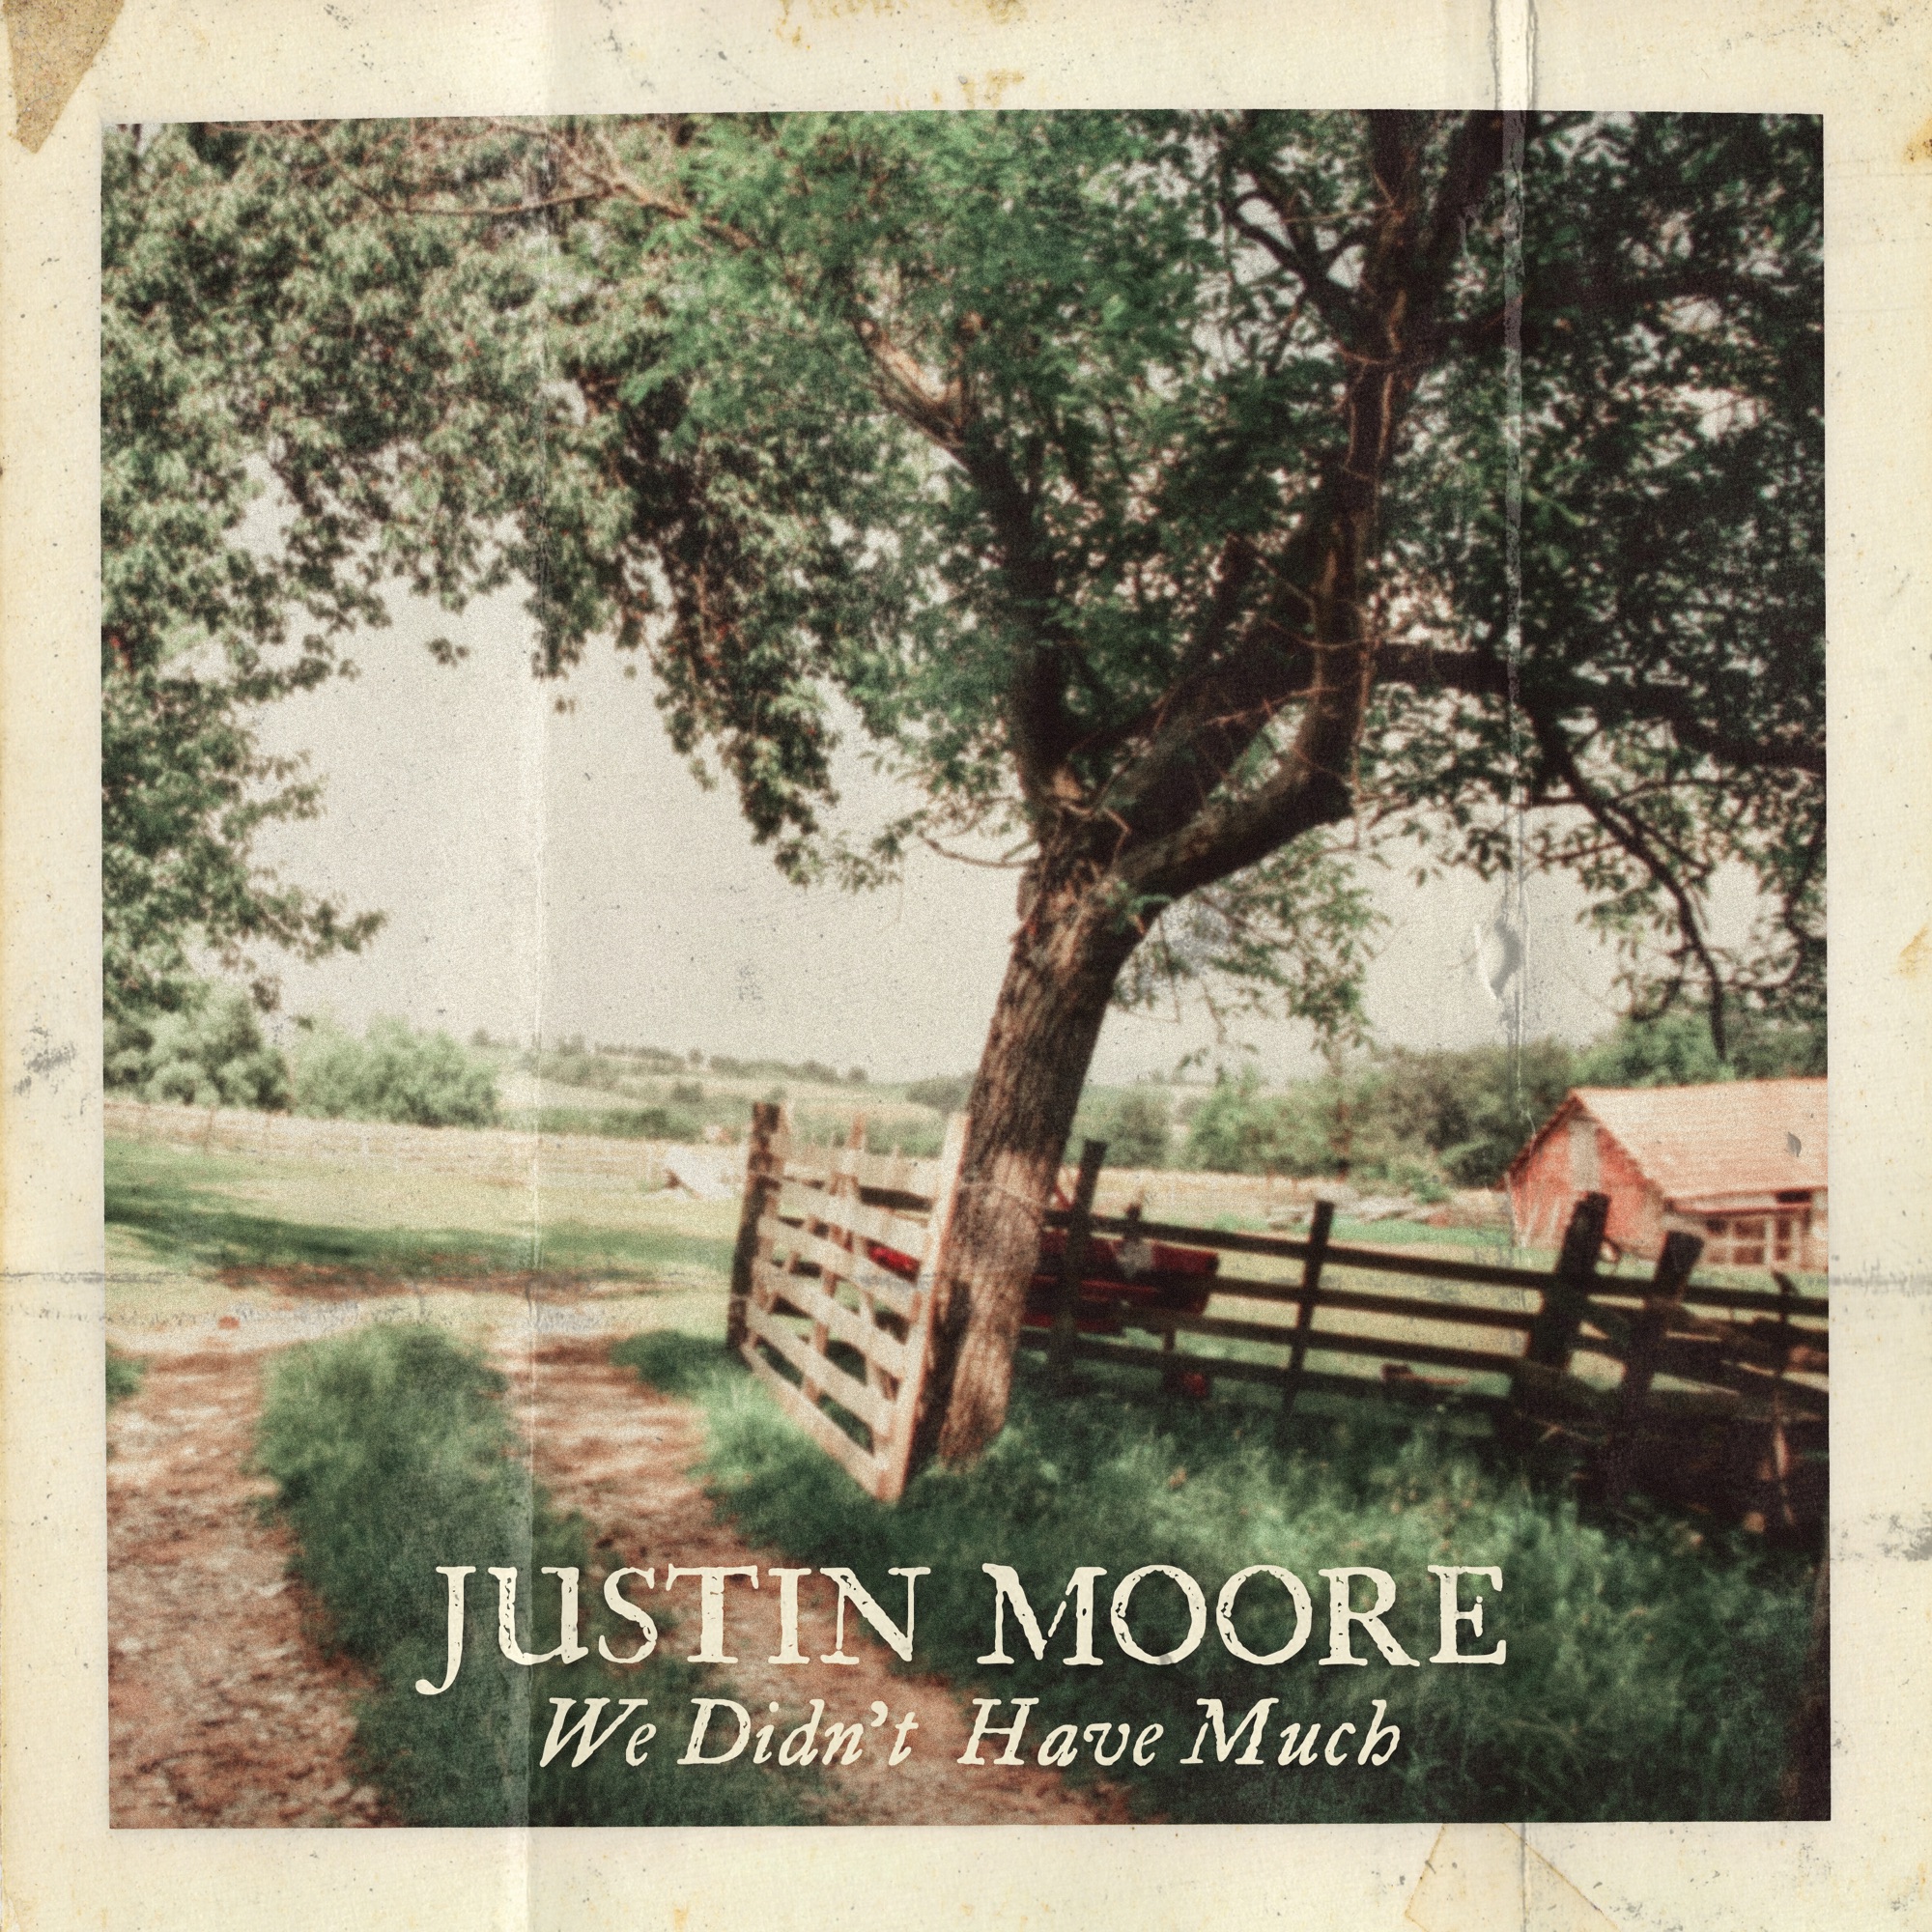 Justin Moore - We Didn't Have Much - Single